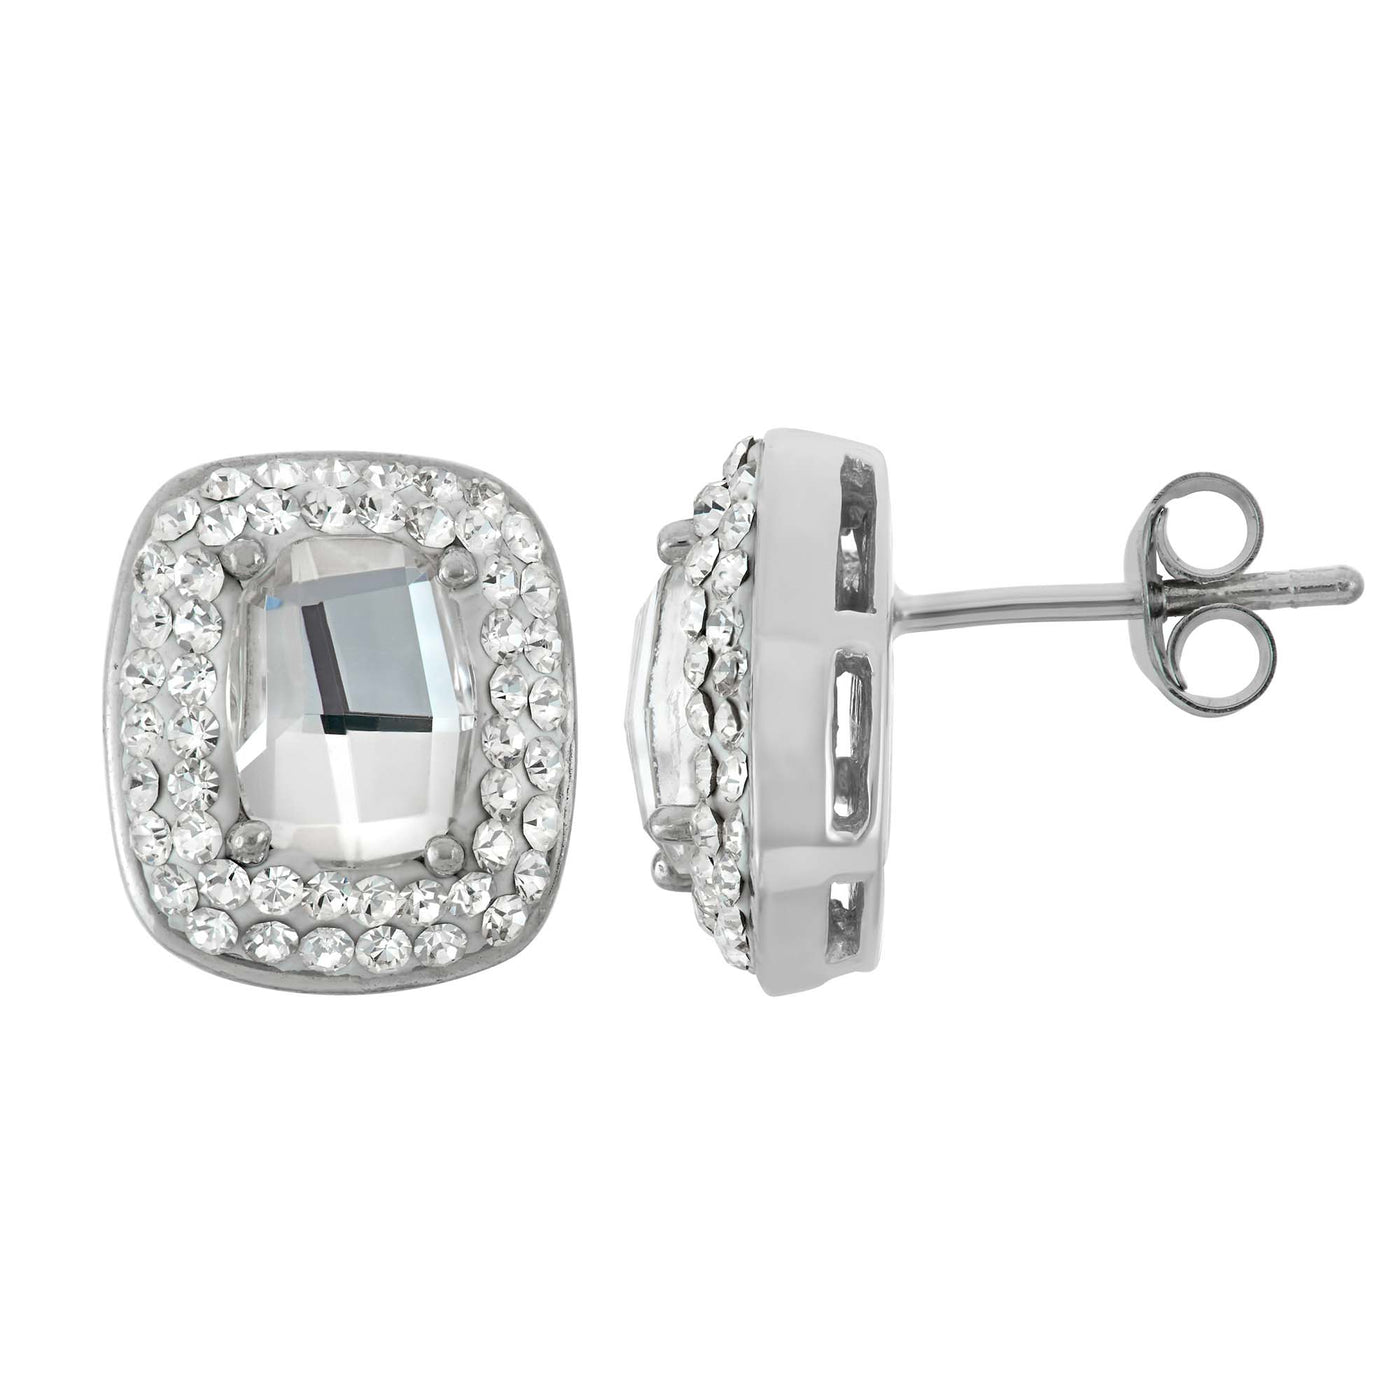 Rebecca Sloane Silver Square Earring With Crystal Elements